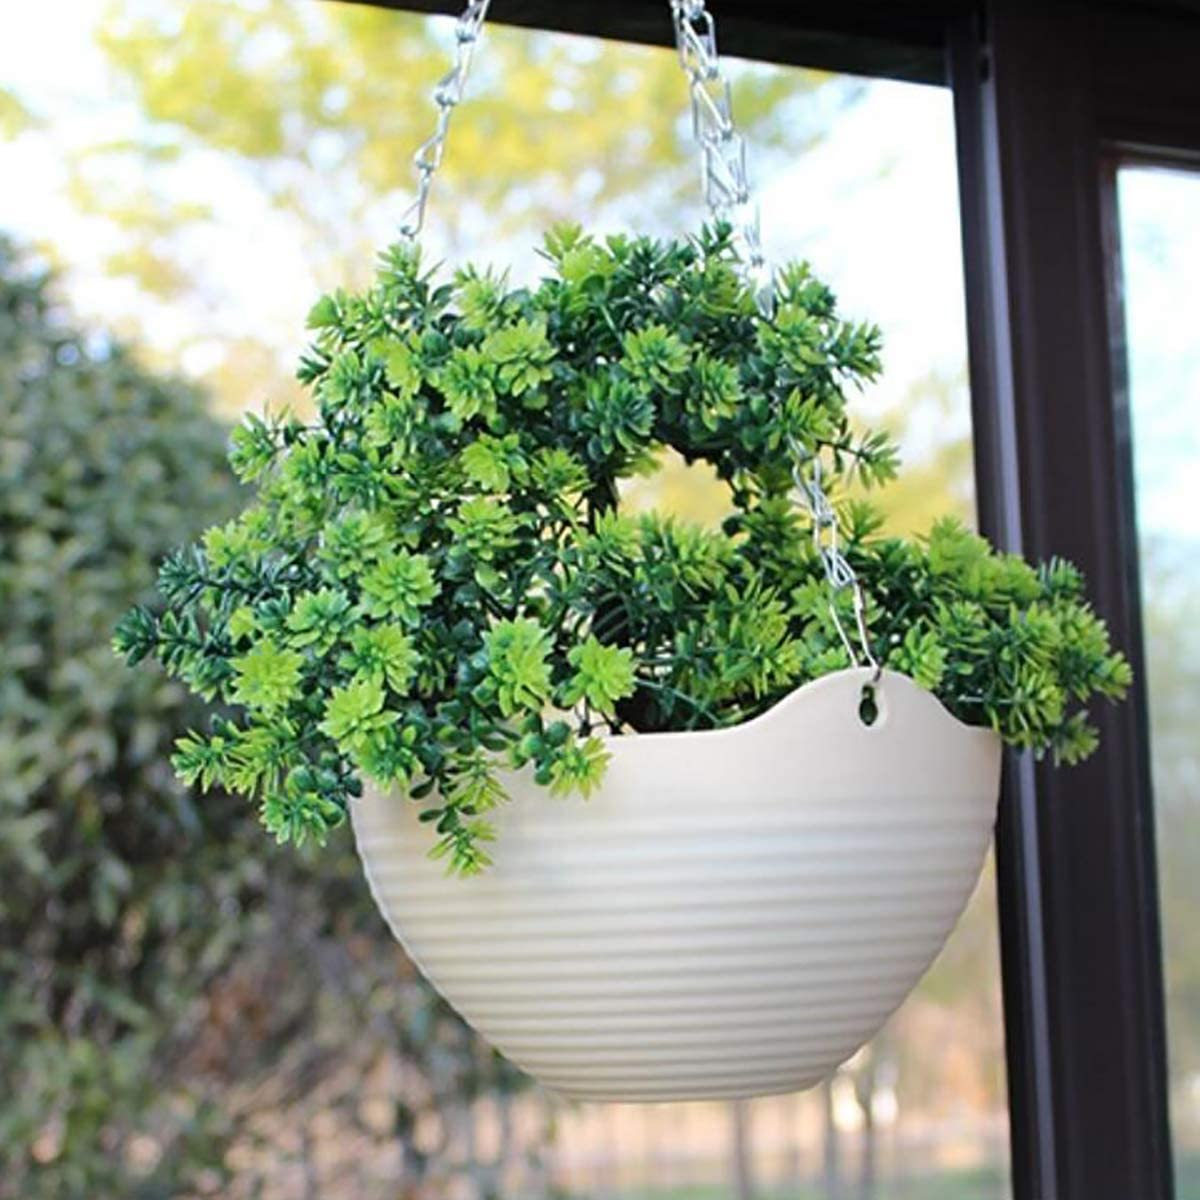 Set of 7 Colors Self-Watering Hanging Planter Indoor Outdoor Garden Flower Plant Pot Container with Drainer and Hanging Chain